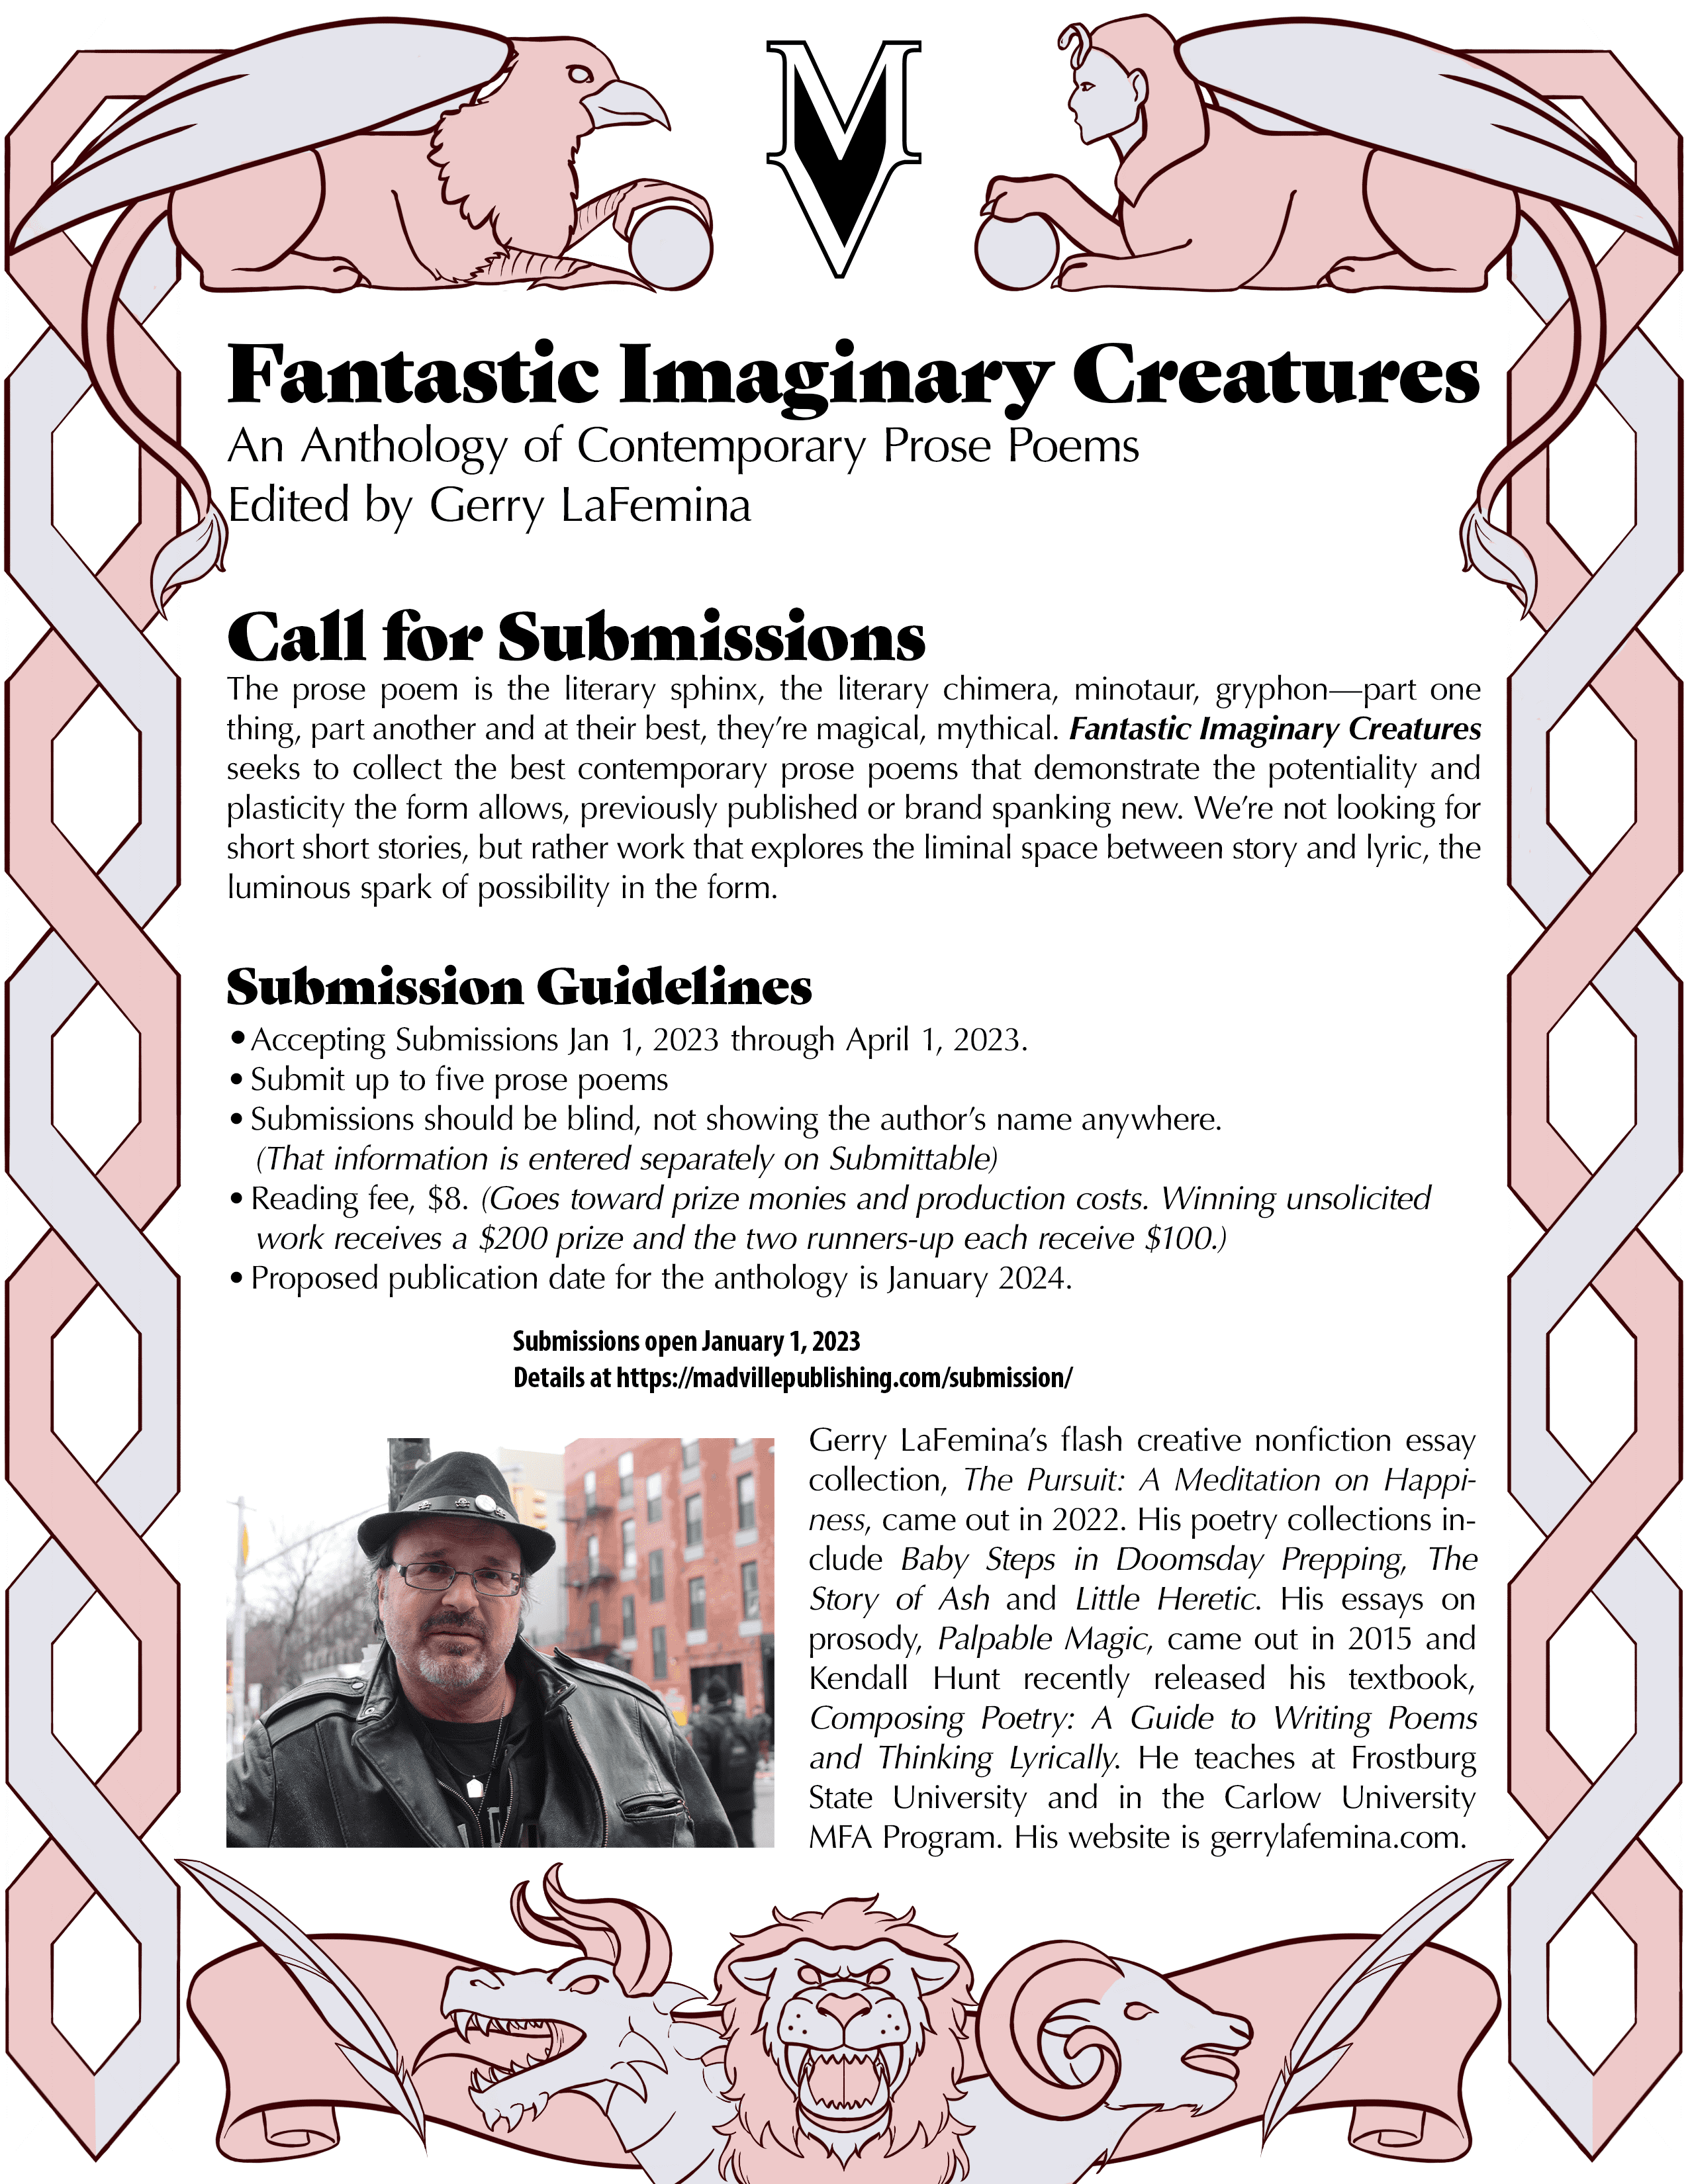 Fantastic Imaginary Creatures: An Anthology of Contemporary Prose Poems Edited by Gerry LaFemina. Call for Submissions. Picture of La in black on a winter street with pink buildings in the background. Around the edges of the flyer with submissions guidelines is a celtic-type border with fantastical creatures in pink and gray.